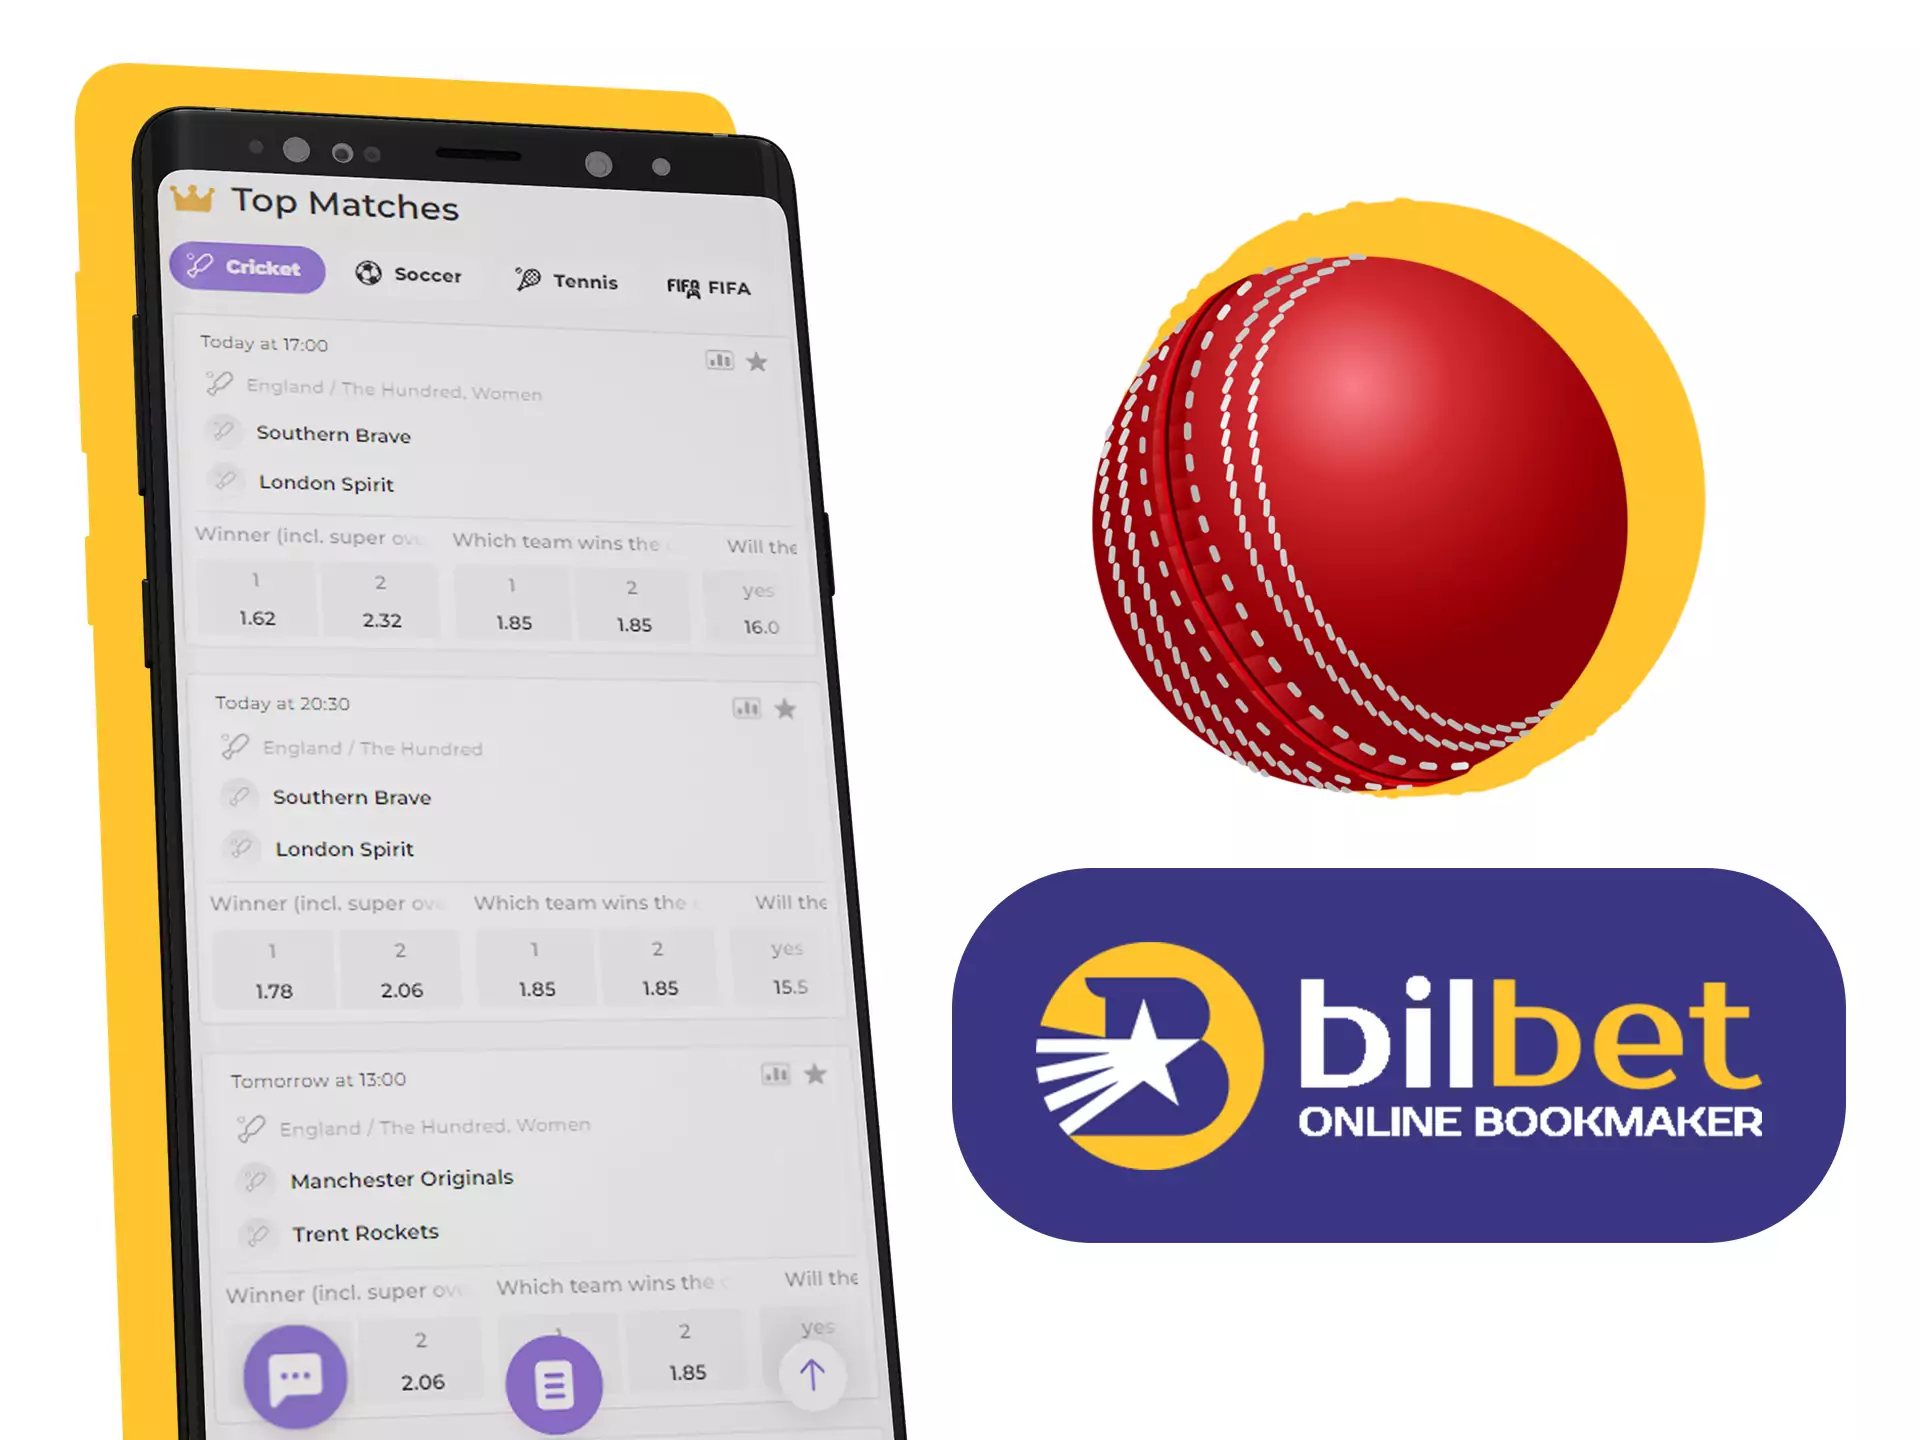 Bet on cricket matches at Bilbet.